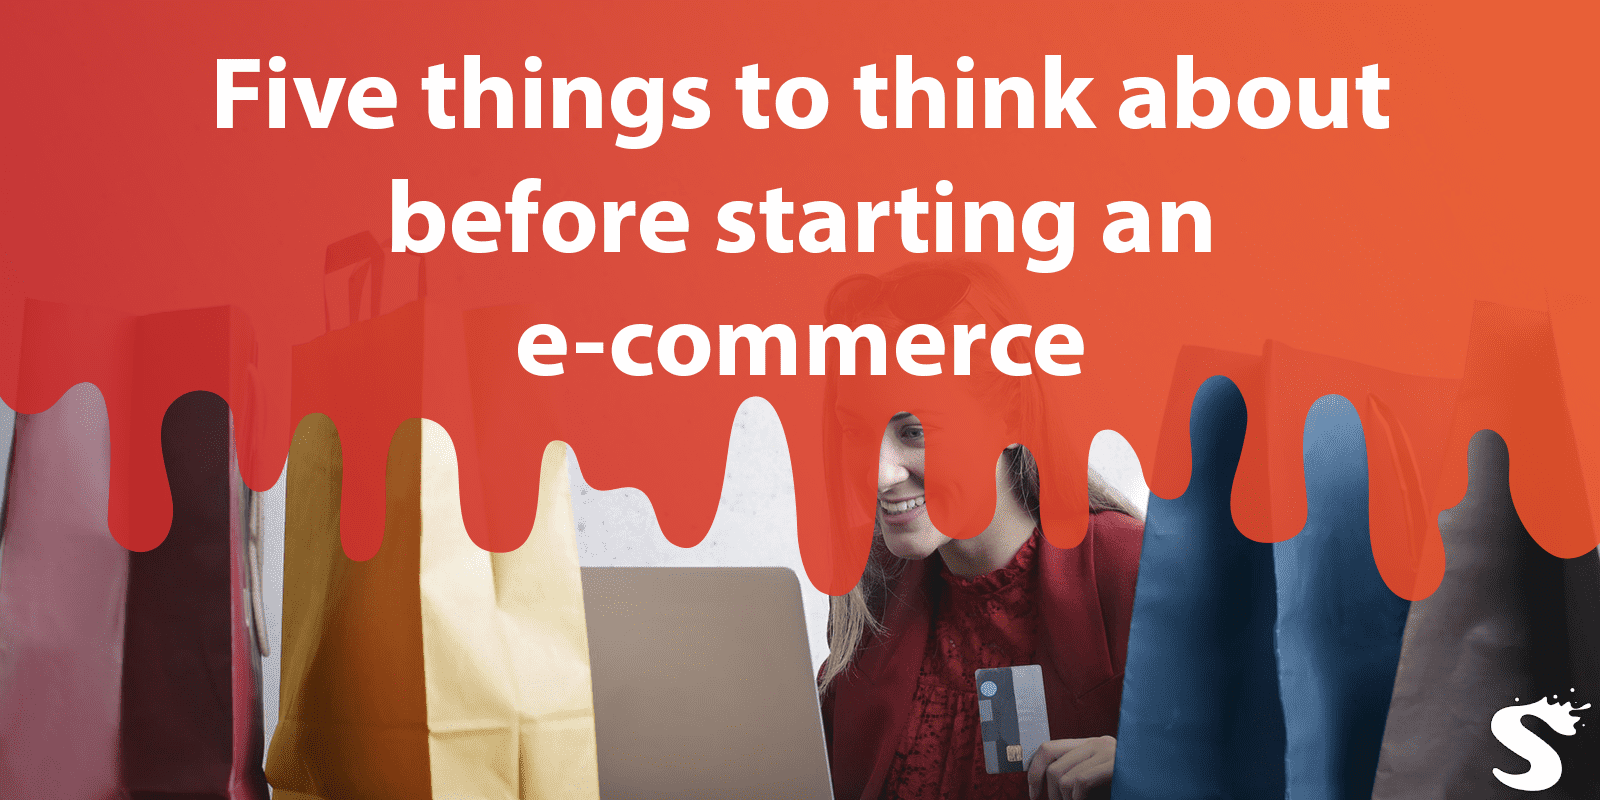 5 things to think about before starting an e-commerce business